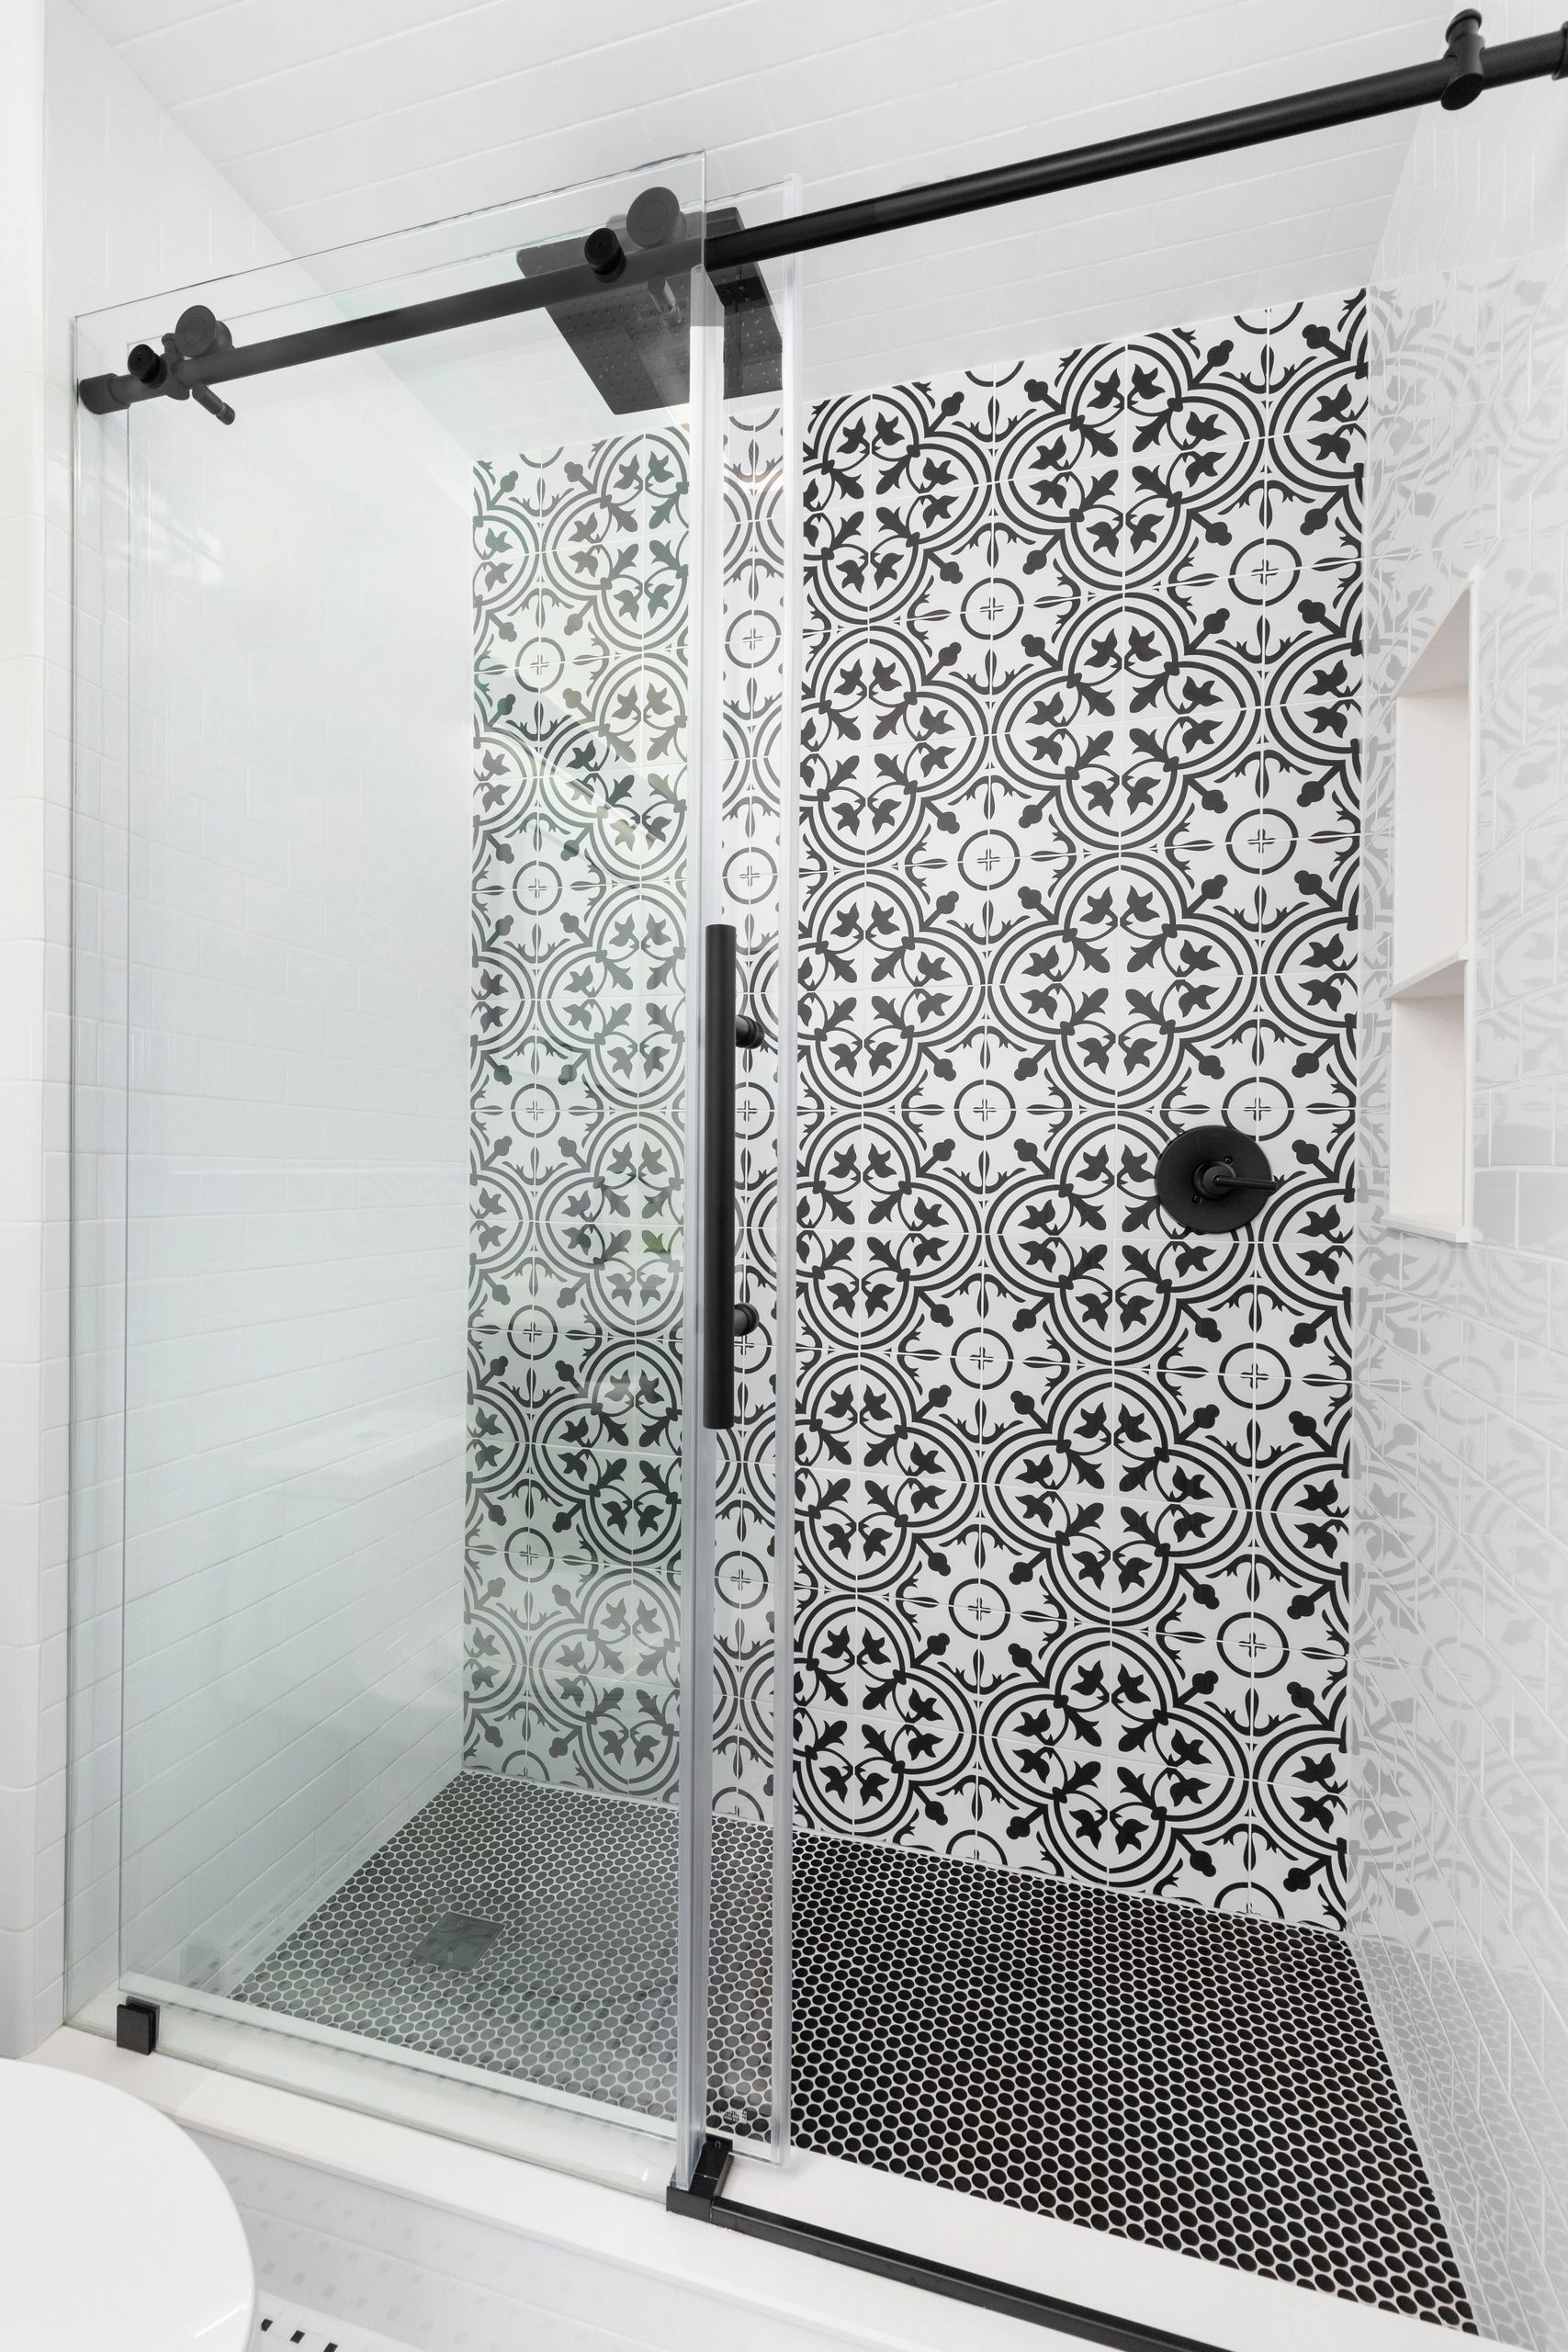 white subway tile shower with black white pattern tile feature penny round mosaic floor and niche